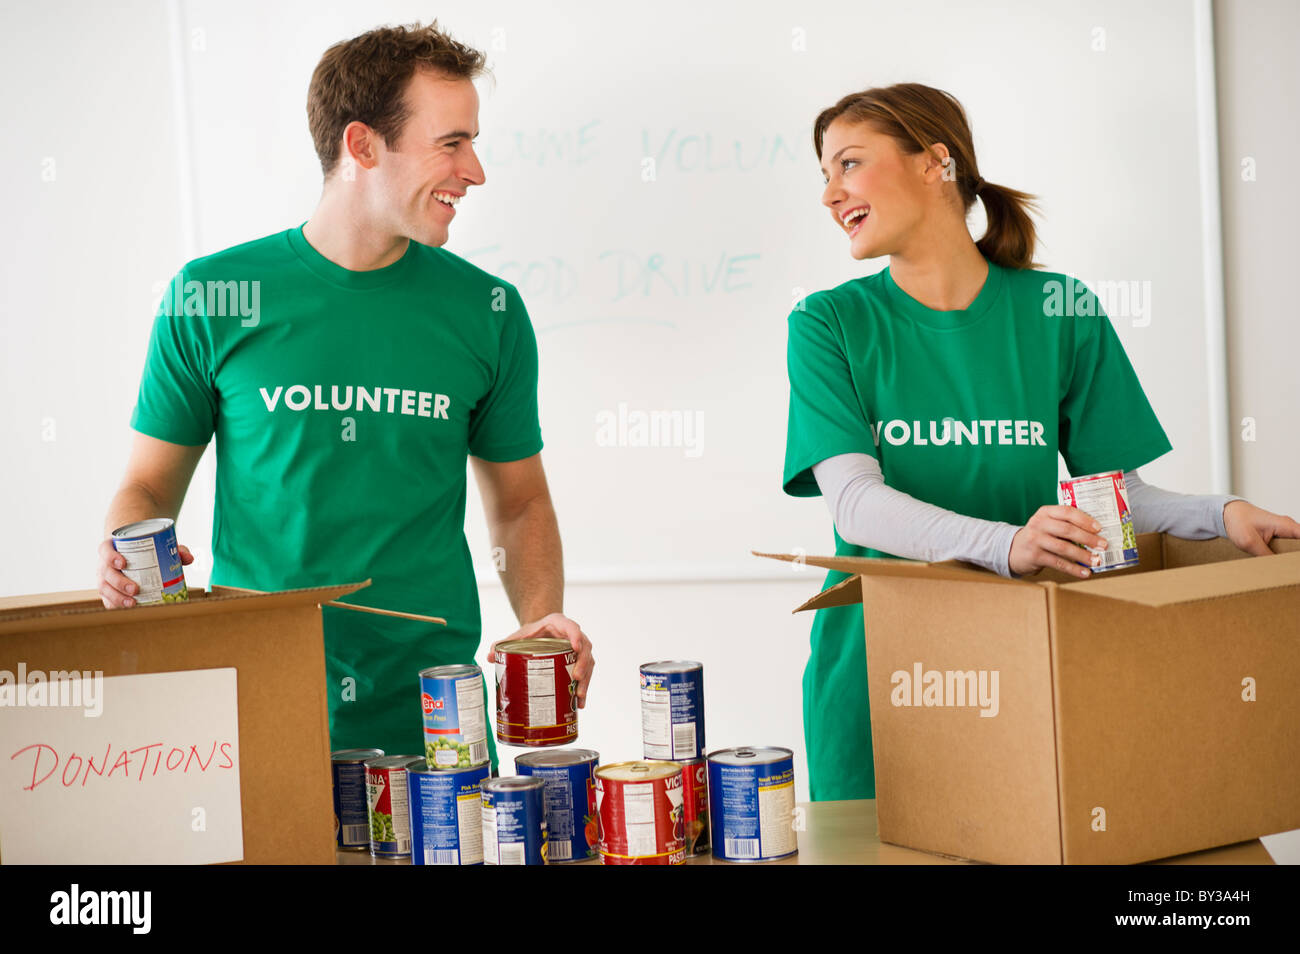 USA, New Jersey, Jersey City, Two young people as volunteers Stock Photo